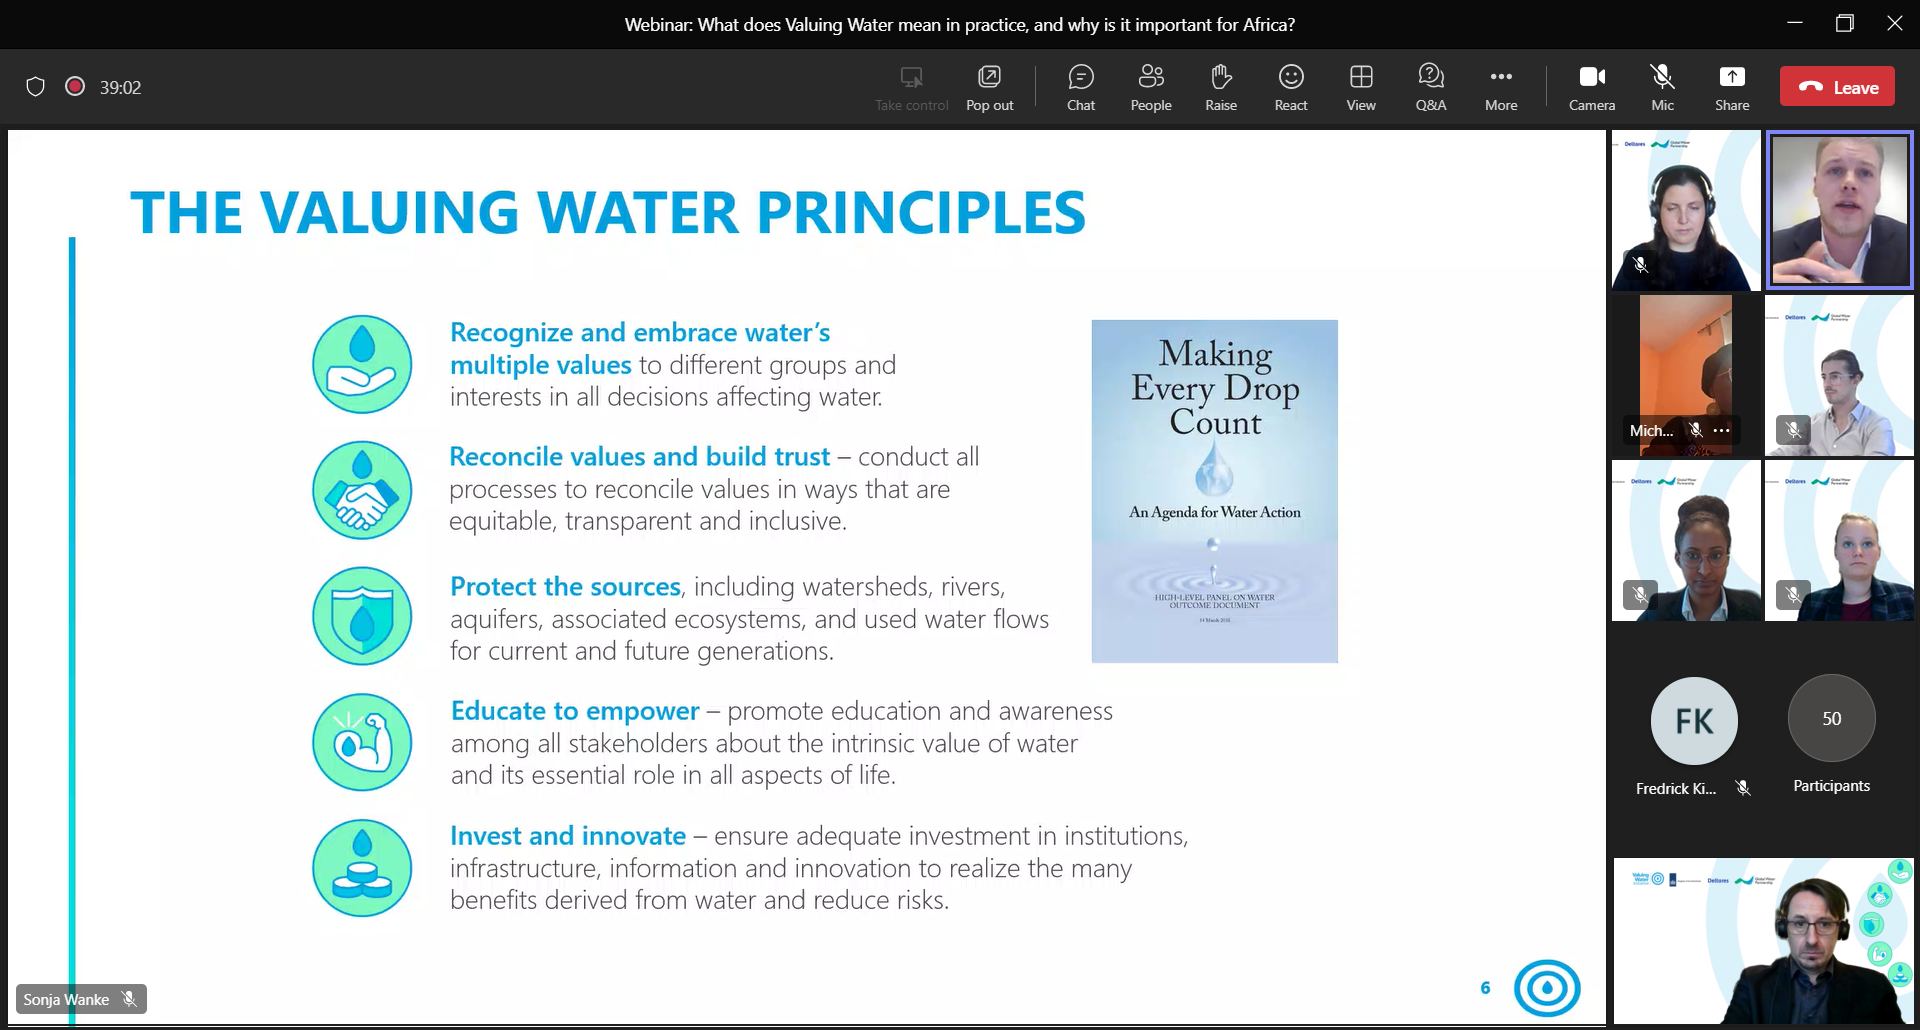 Figure 1. The 5 UN Valuing Water Principles, as presented by Joe Ray